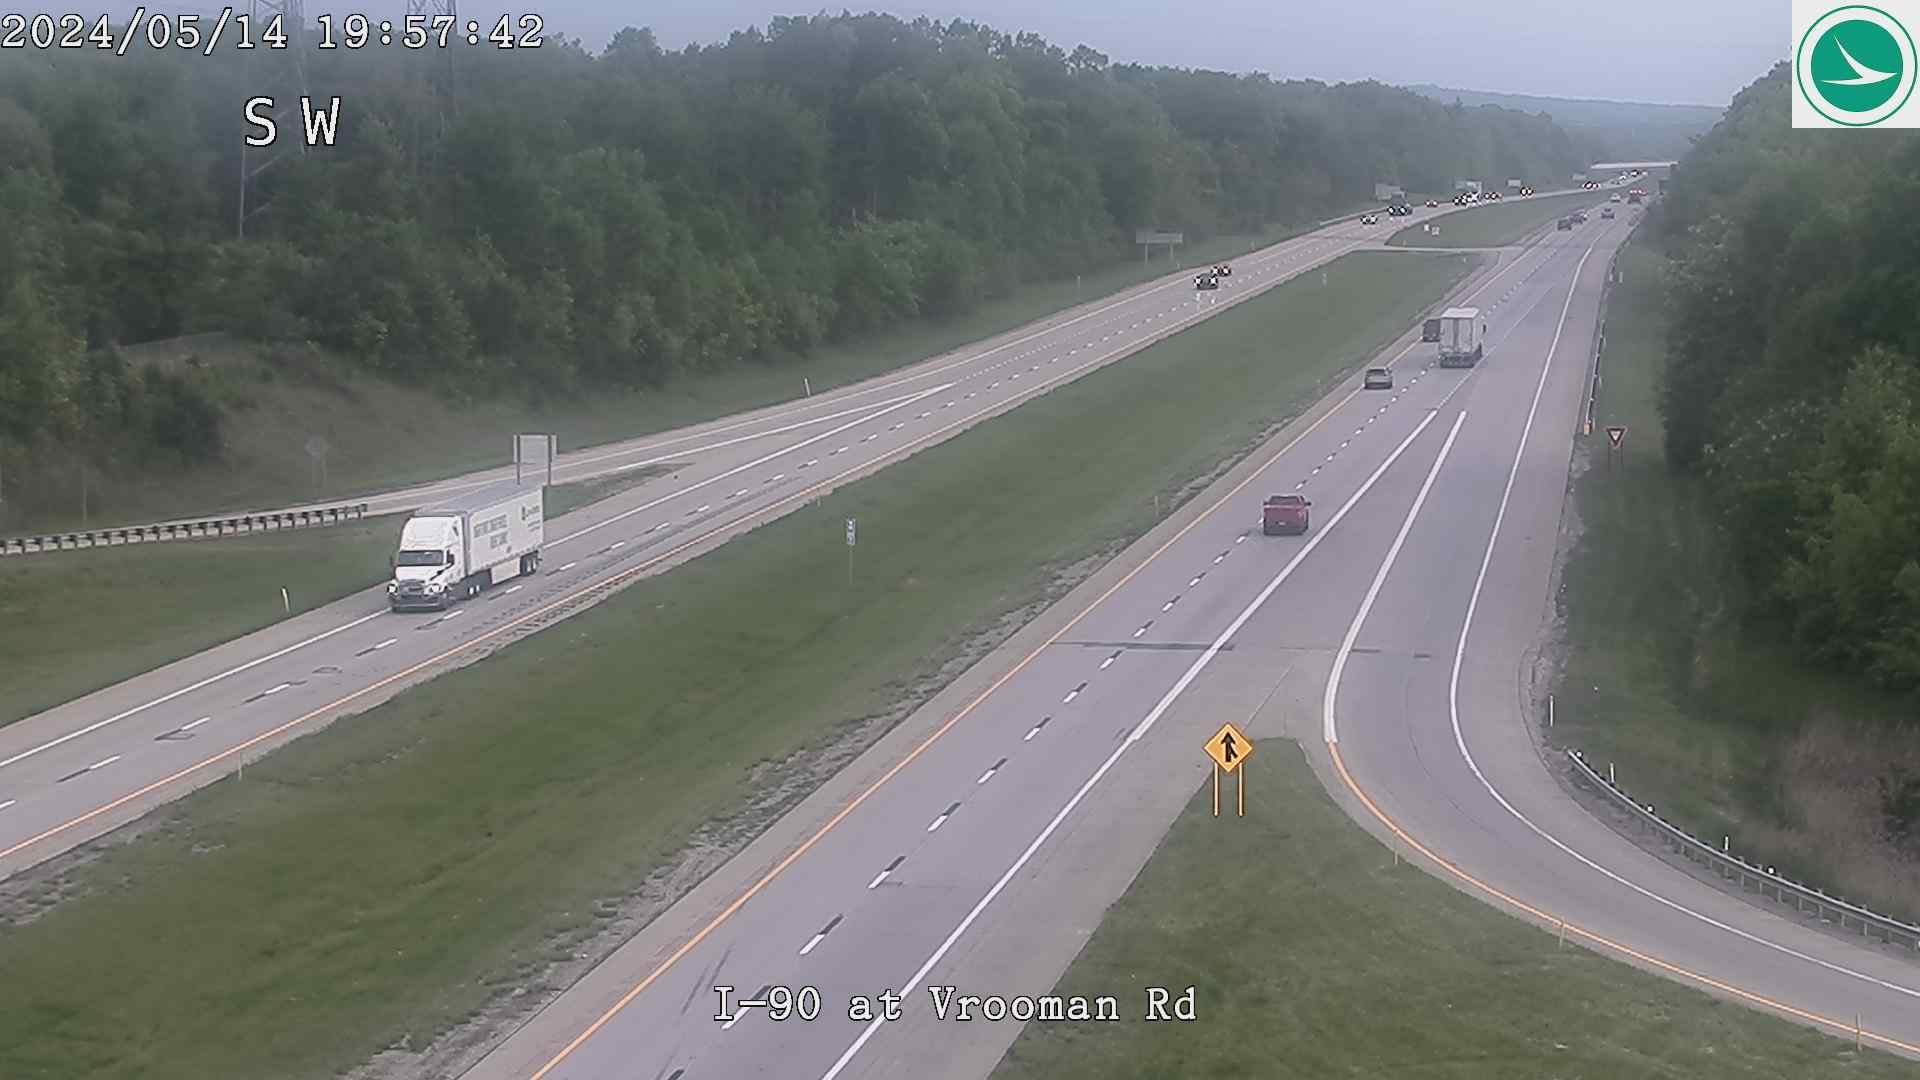 Traffic Cam Five Points: I-90 at Vrooman Rd Player